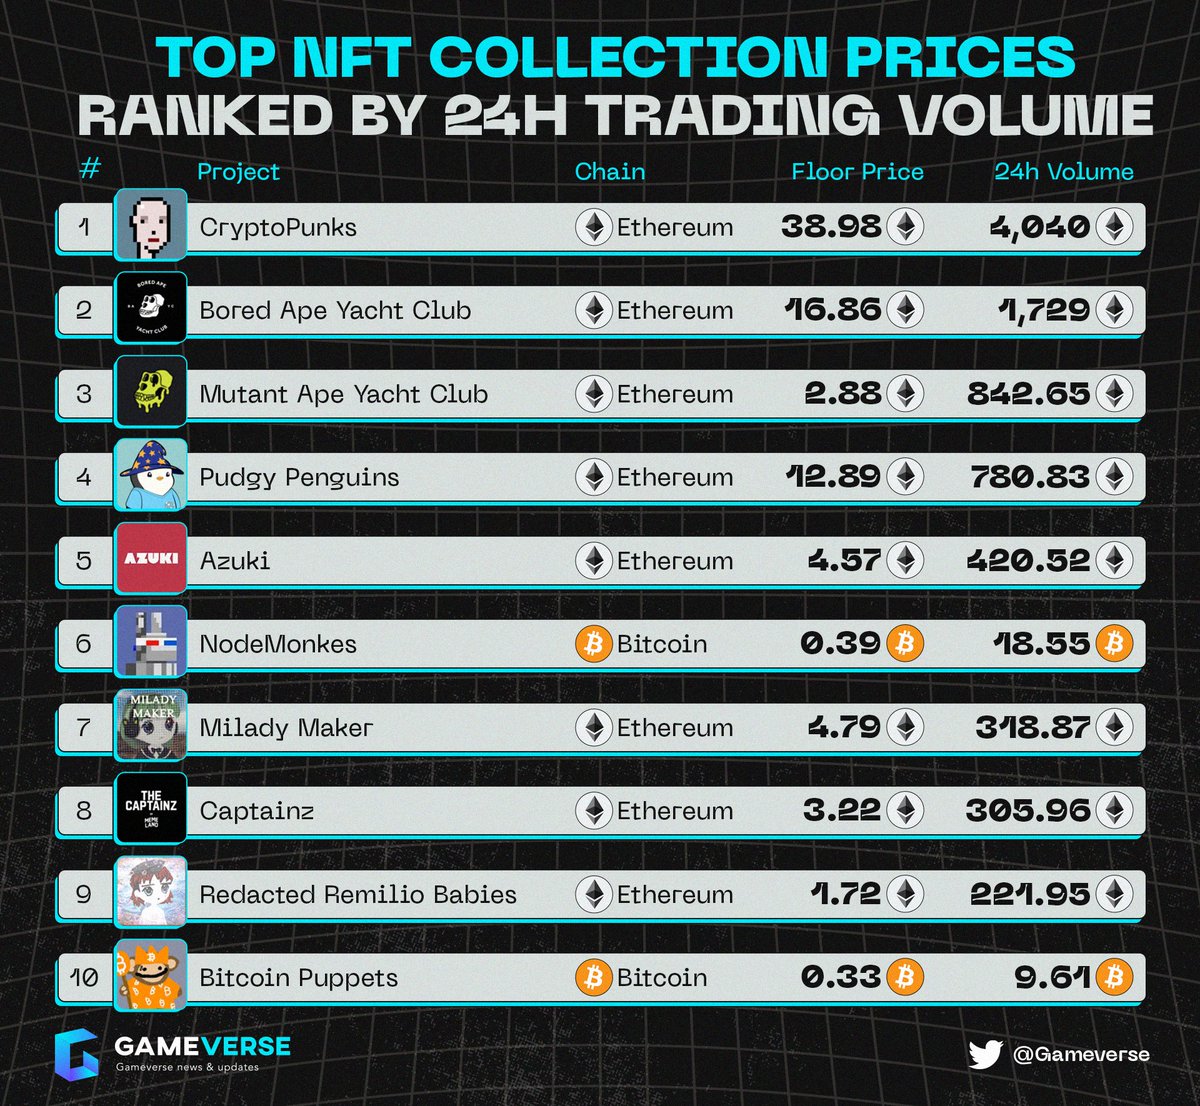 🔥Top NFT Collection Prices Ranked by 24H Trading Volume🔥

🥇@cryptopunksnfts
🥈@BoredApeYC
🥉#MutantApeYachtClub
@pudgypenguins @Azuki @nodemonkes @miladymaker 
@TheCaptainzClub @RemilioBaby @lepuppeteerfou 

#NFTs